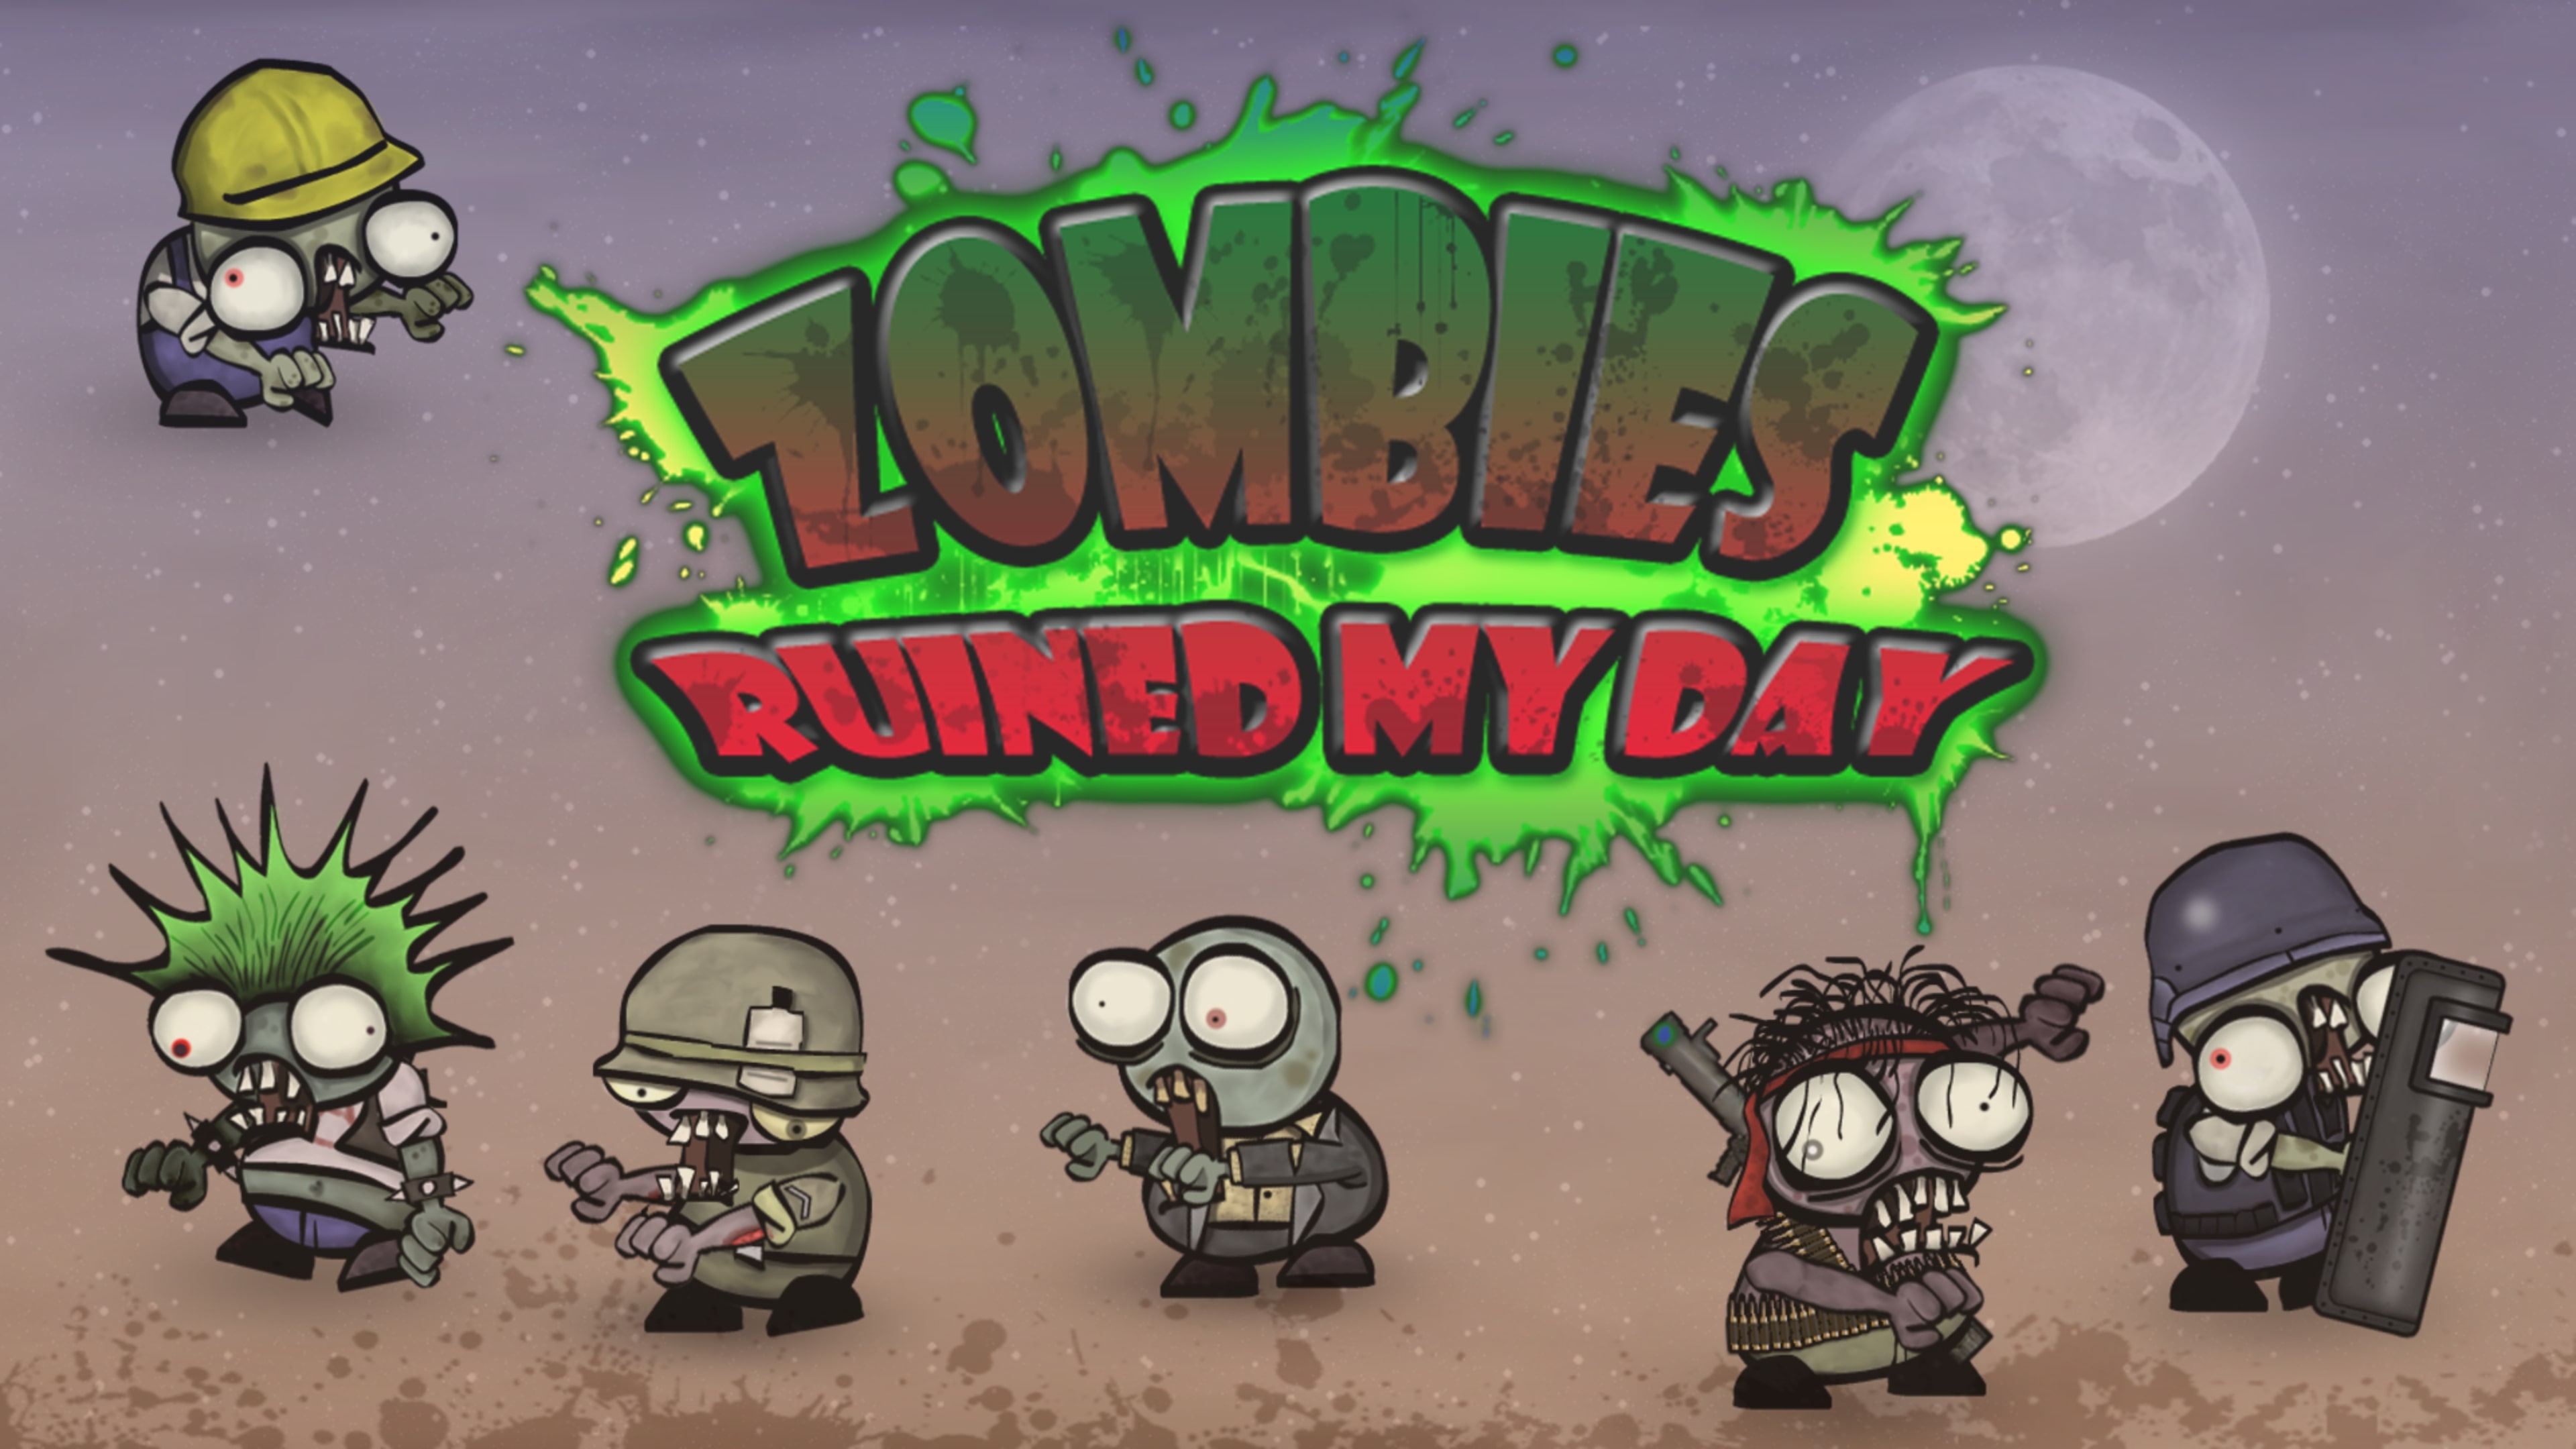 Zombies ruined my day